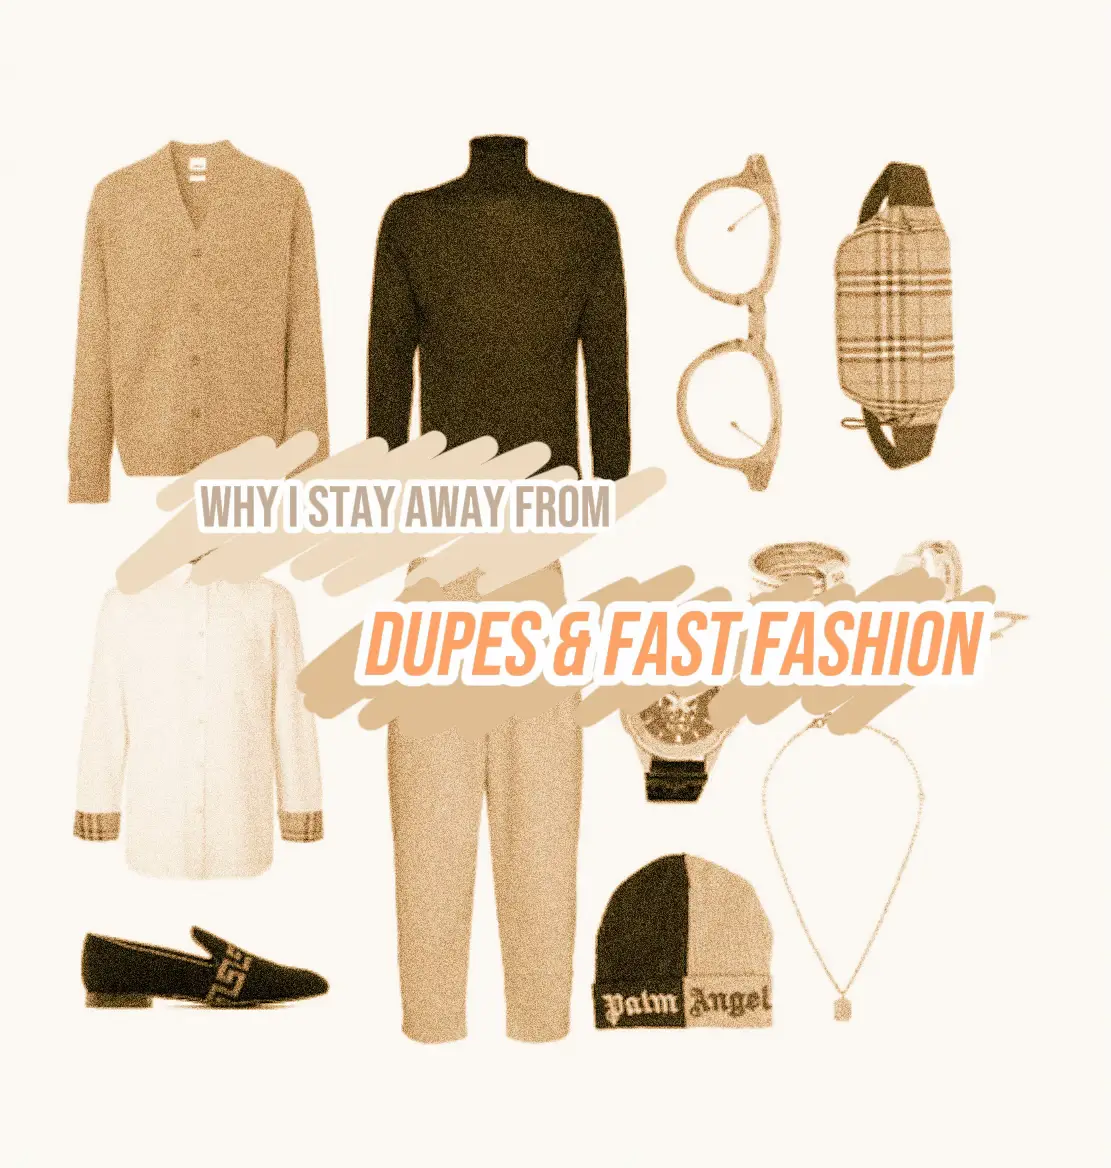 Dump the Dupes: Cheap “dupes” add to clothing waste and can steal small  designers creativity